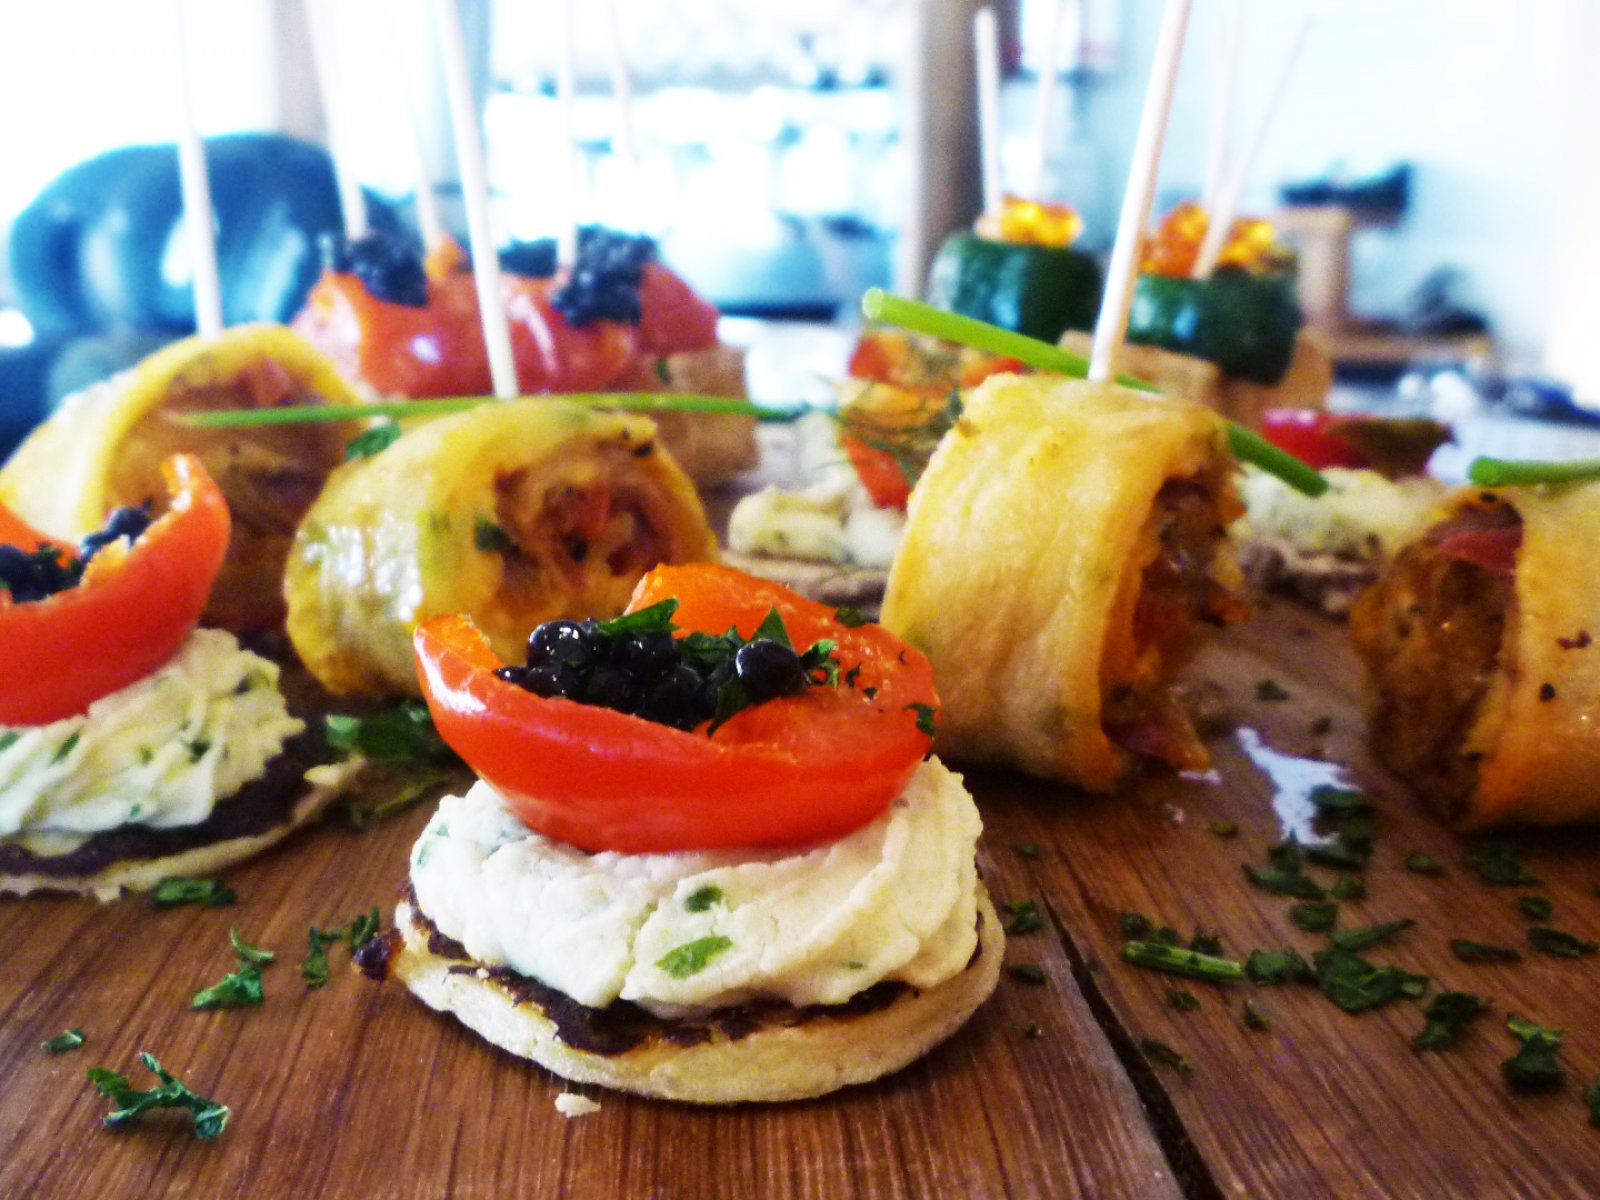 How to try pincho in Barcelona